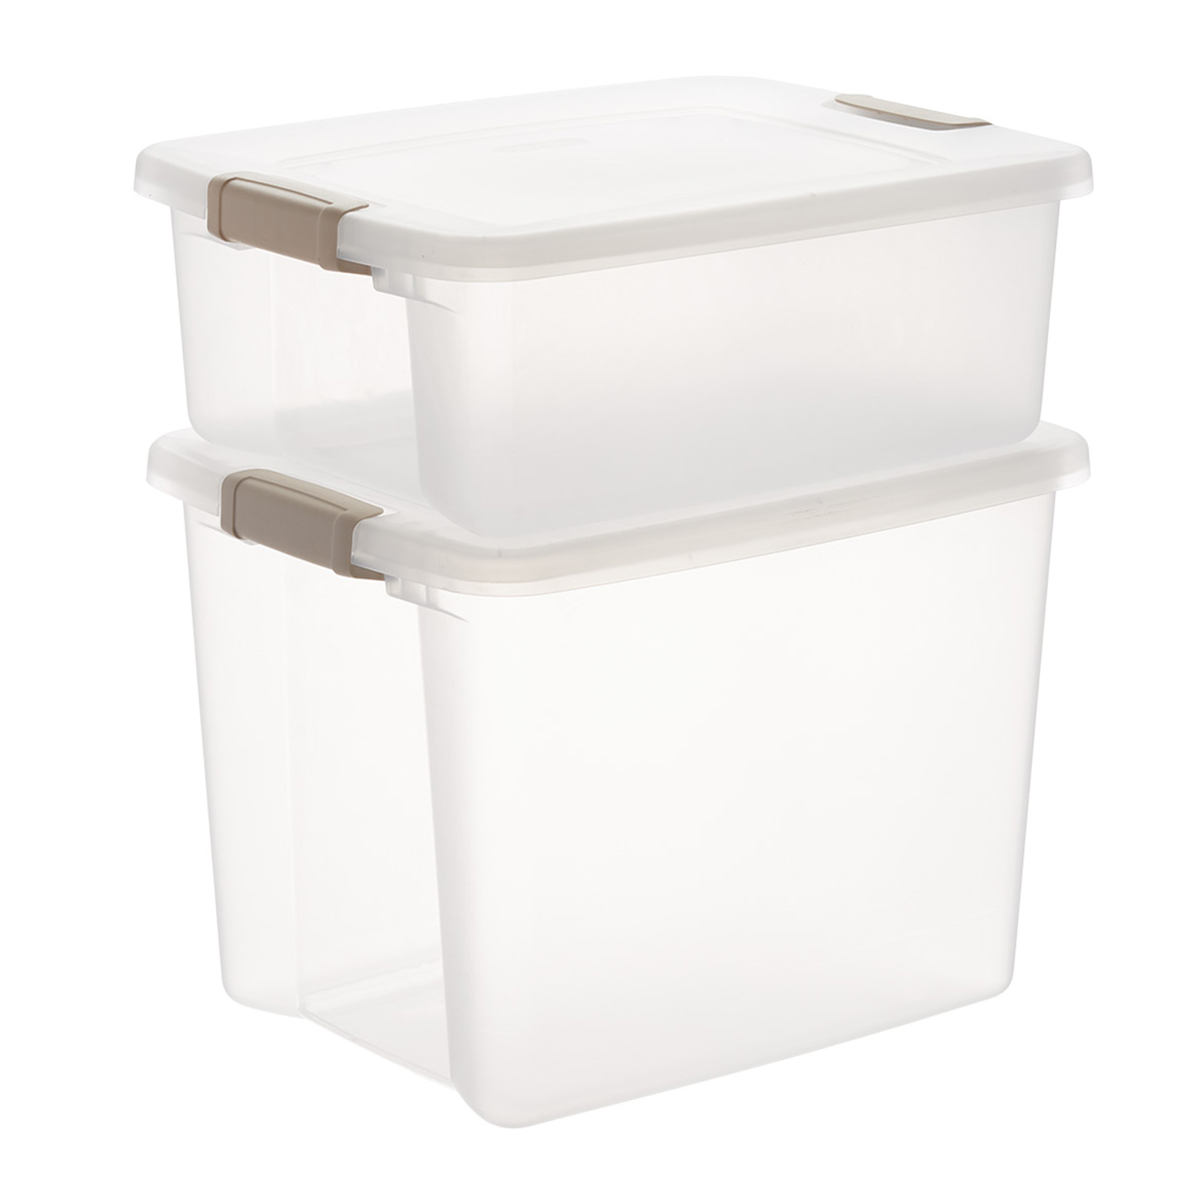 10 x 15Lt STORAGE TUB BOX CONTAINERS HEAVY DUTY ROLLER LIDS CARRY HANDLES AP 